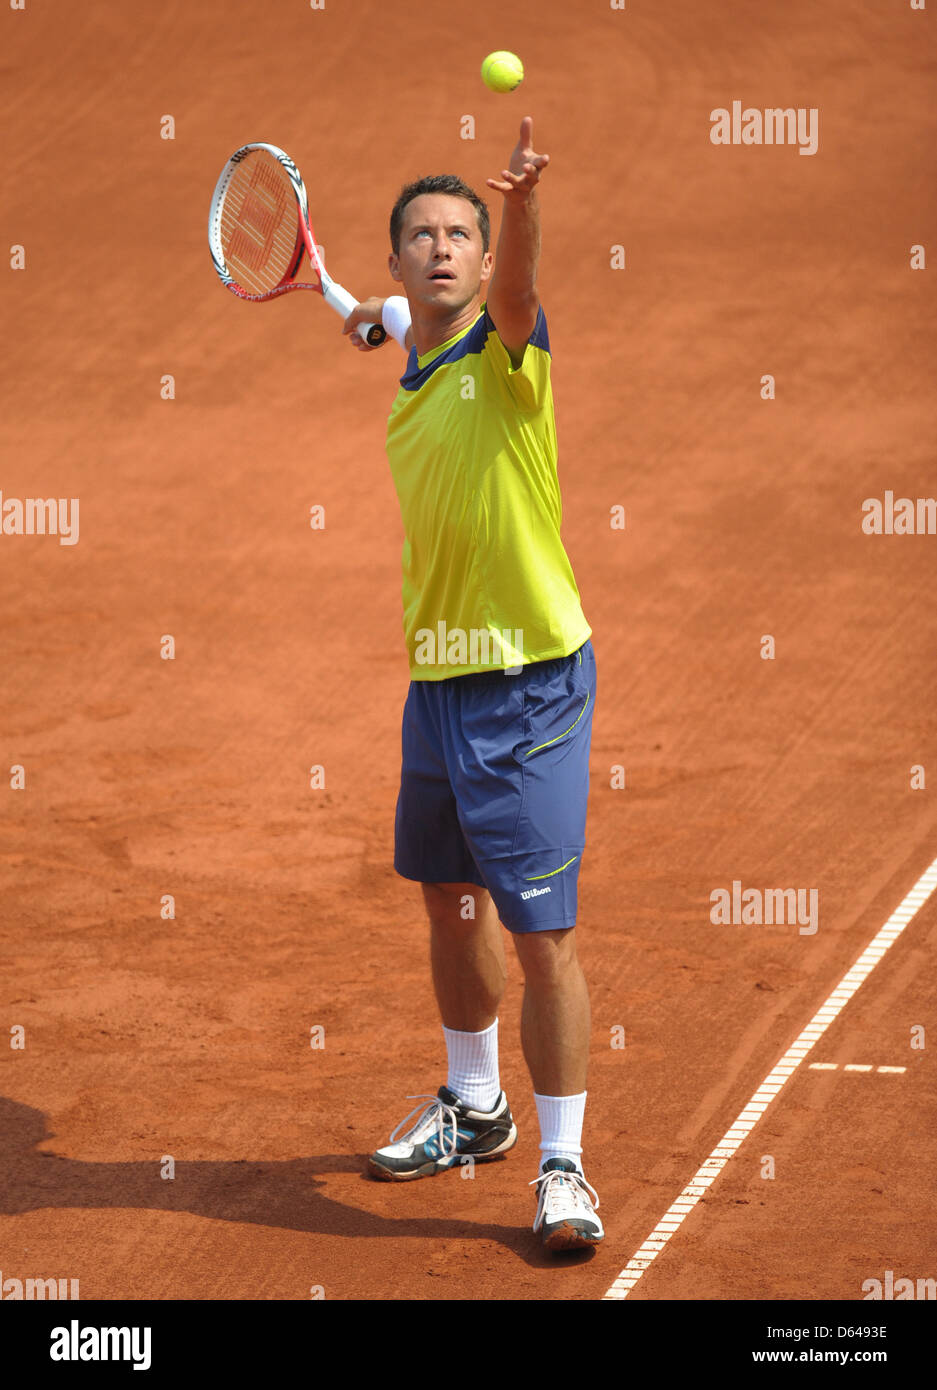 German tennis pro Philipp Kohlschreiber serves the ball against Croatia's Zovko during the Tennis World Team Cup match between Germany and Croatia at the Rochusclub in Duesseldorf, Germany, 23 May 2012.   Photo: Caroline Seidel Stock Photo